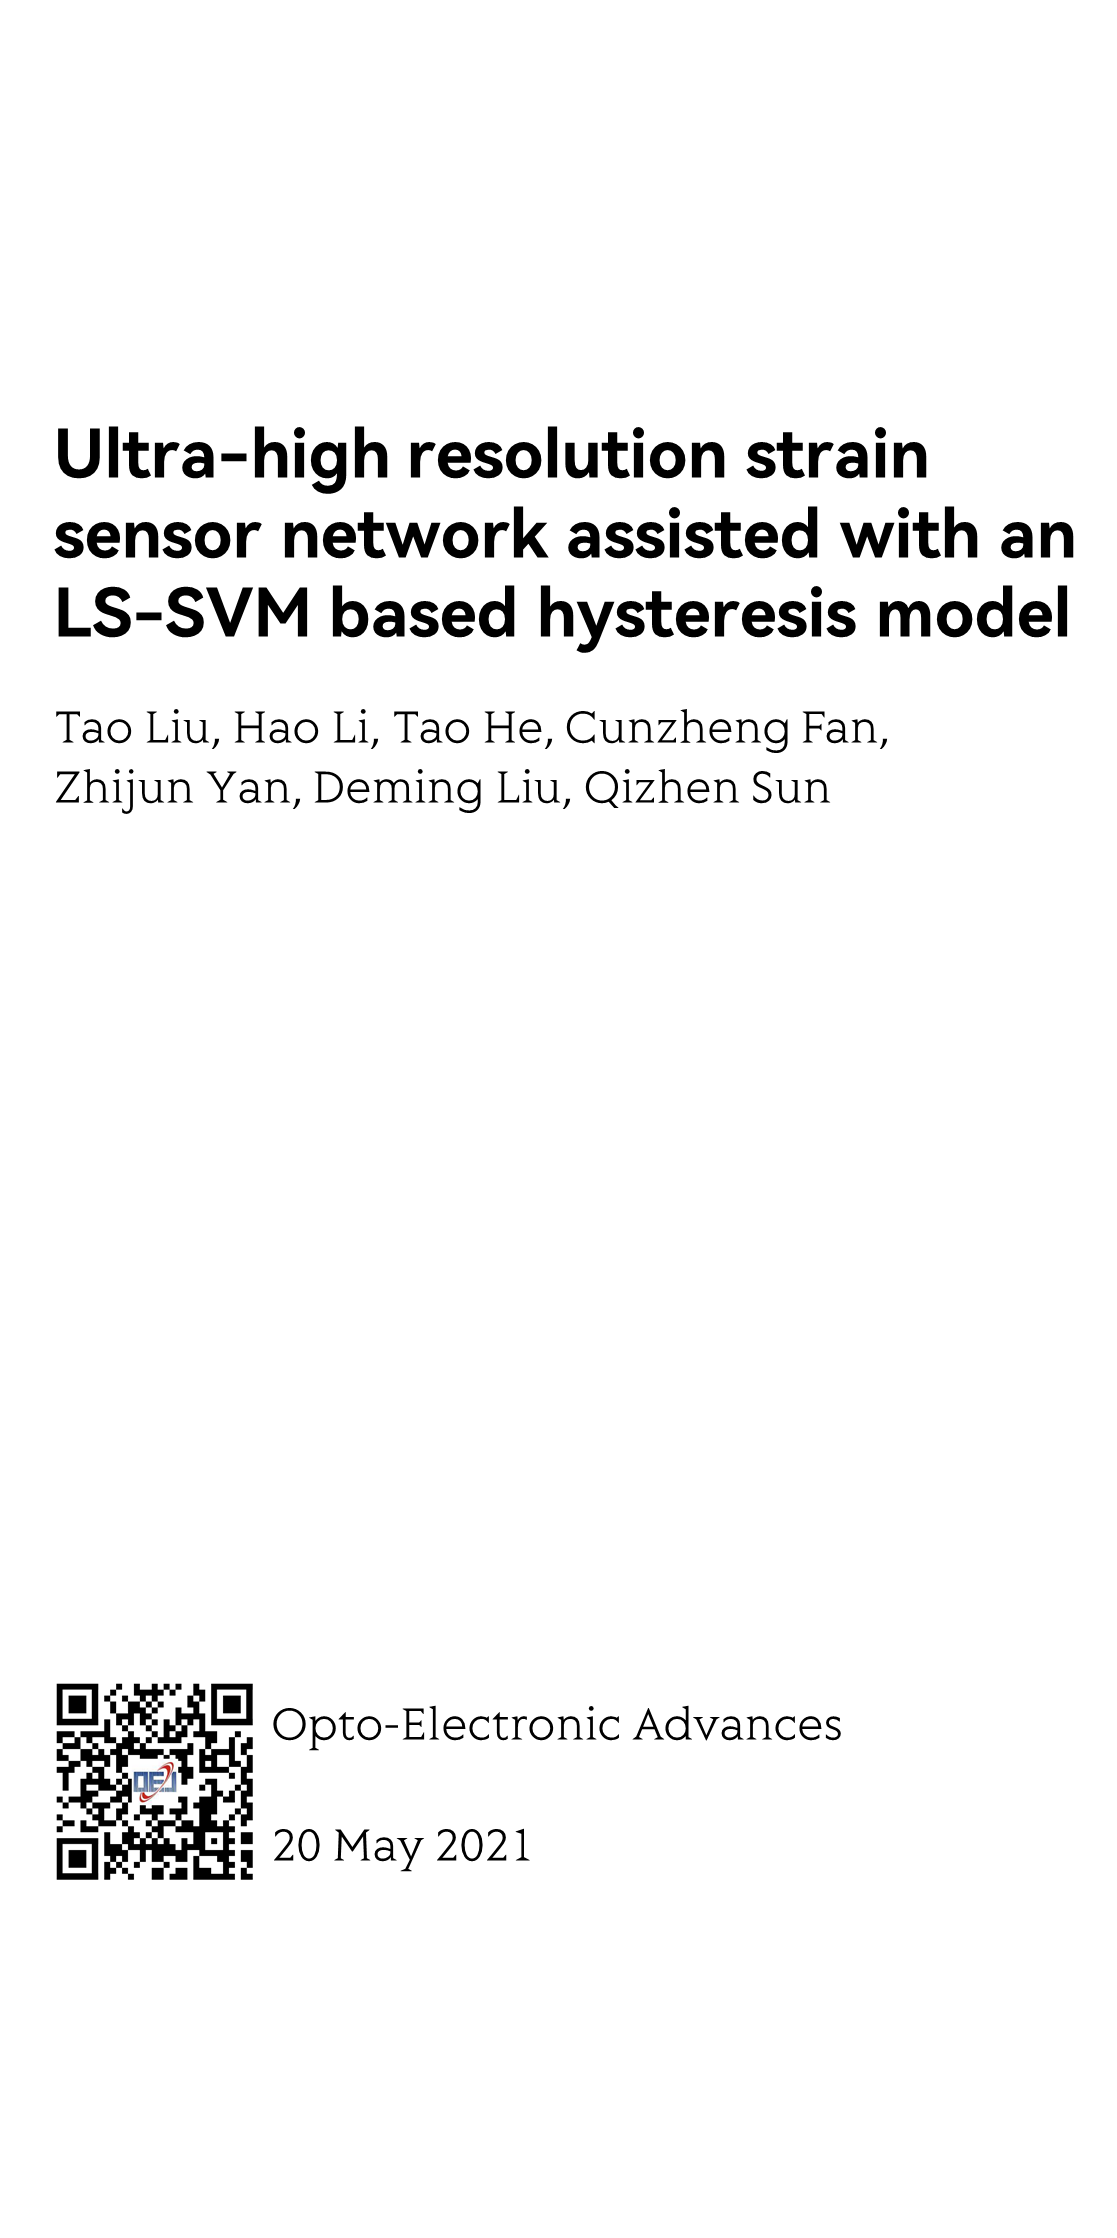 Ultra-high resolution strain sensor network assisted with an LS-SVM based hysteresis model_1